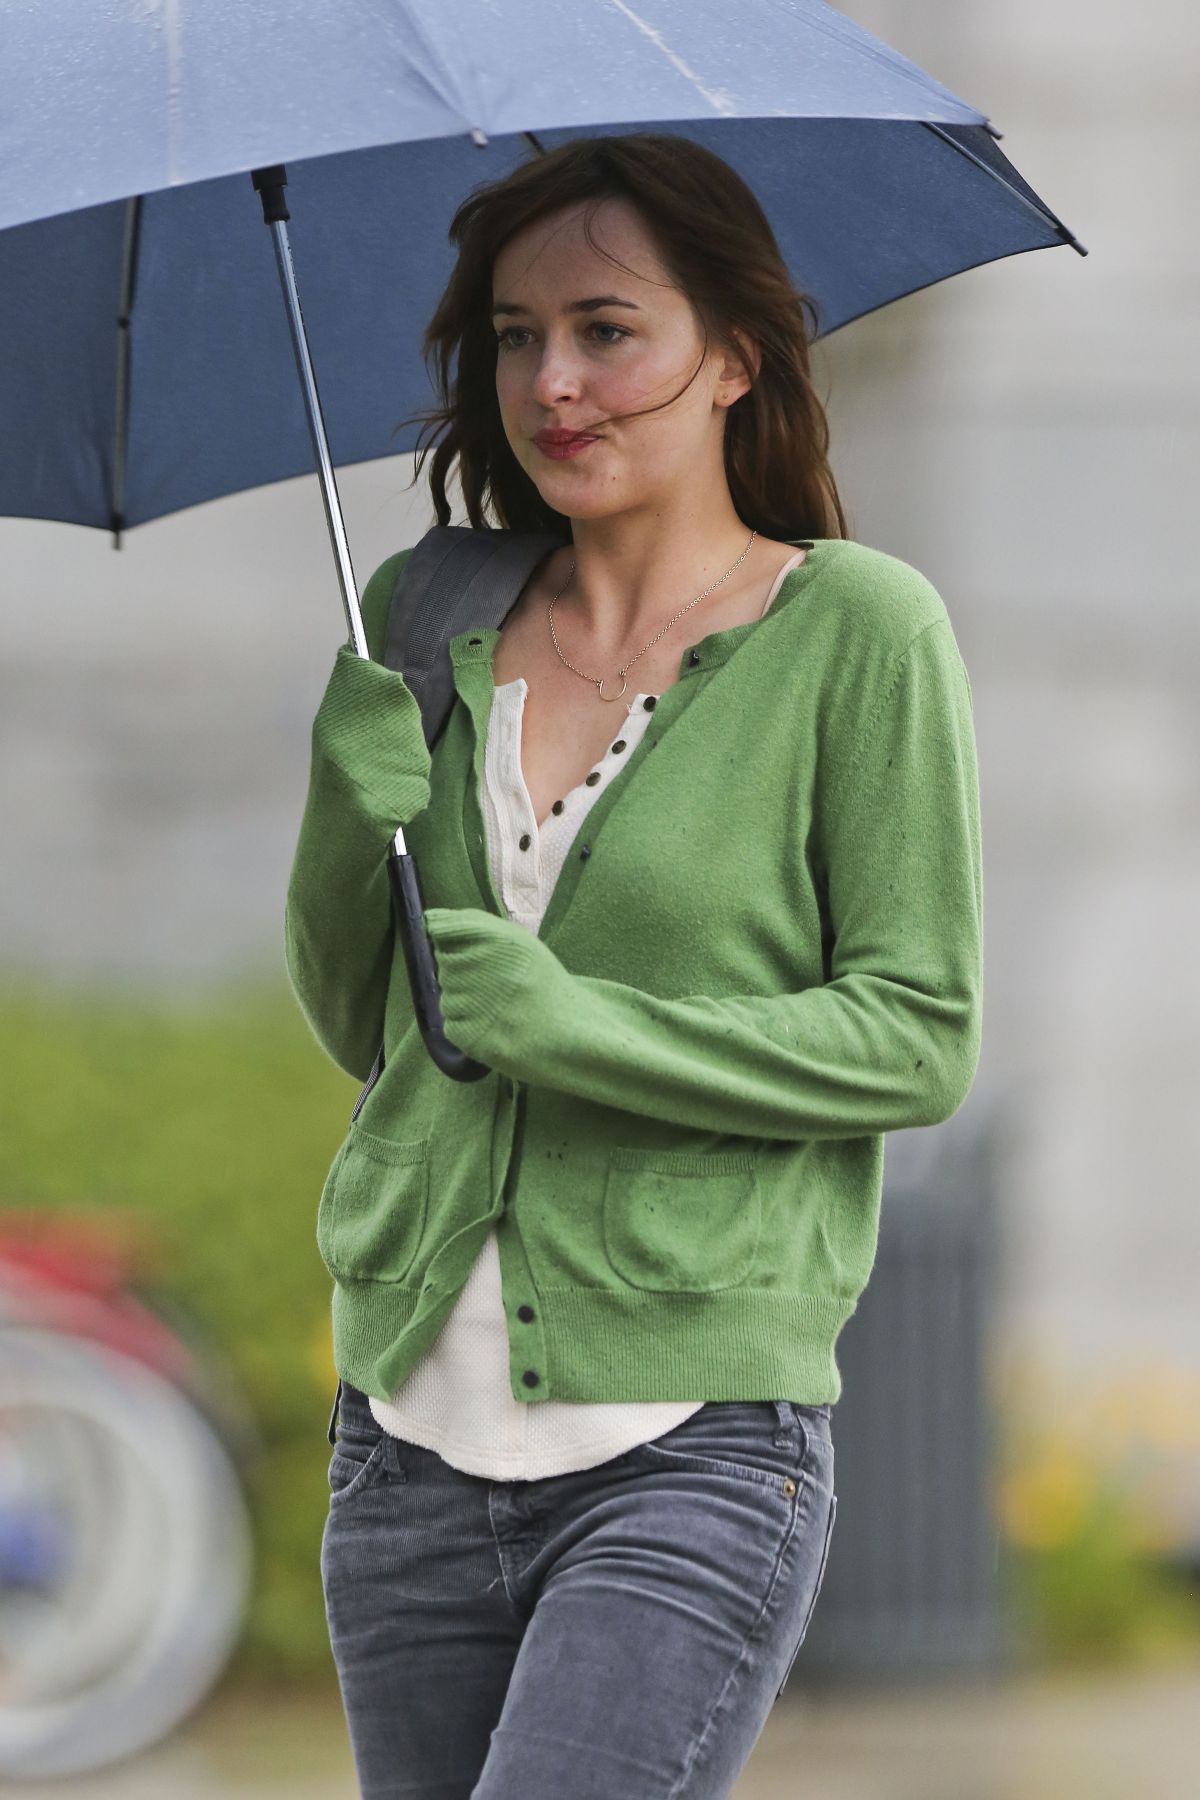 DAKOTA JOHNSON On The Set Of Fifty Shades Of Gray In Vancouver HawtCelebs